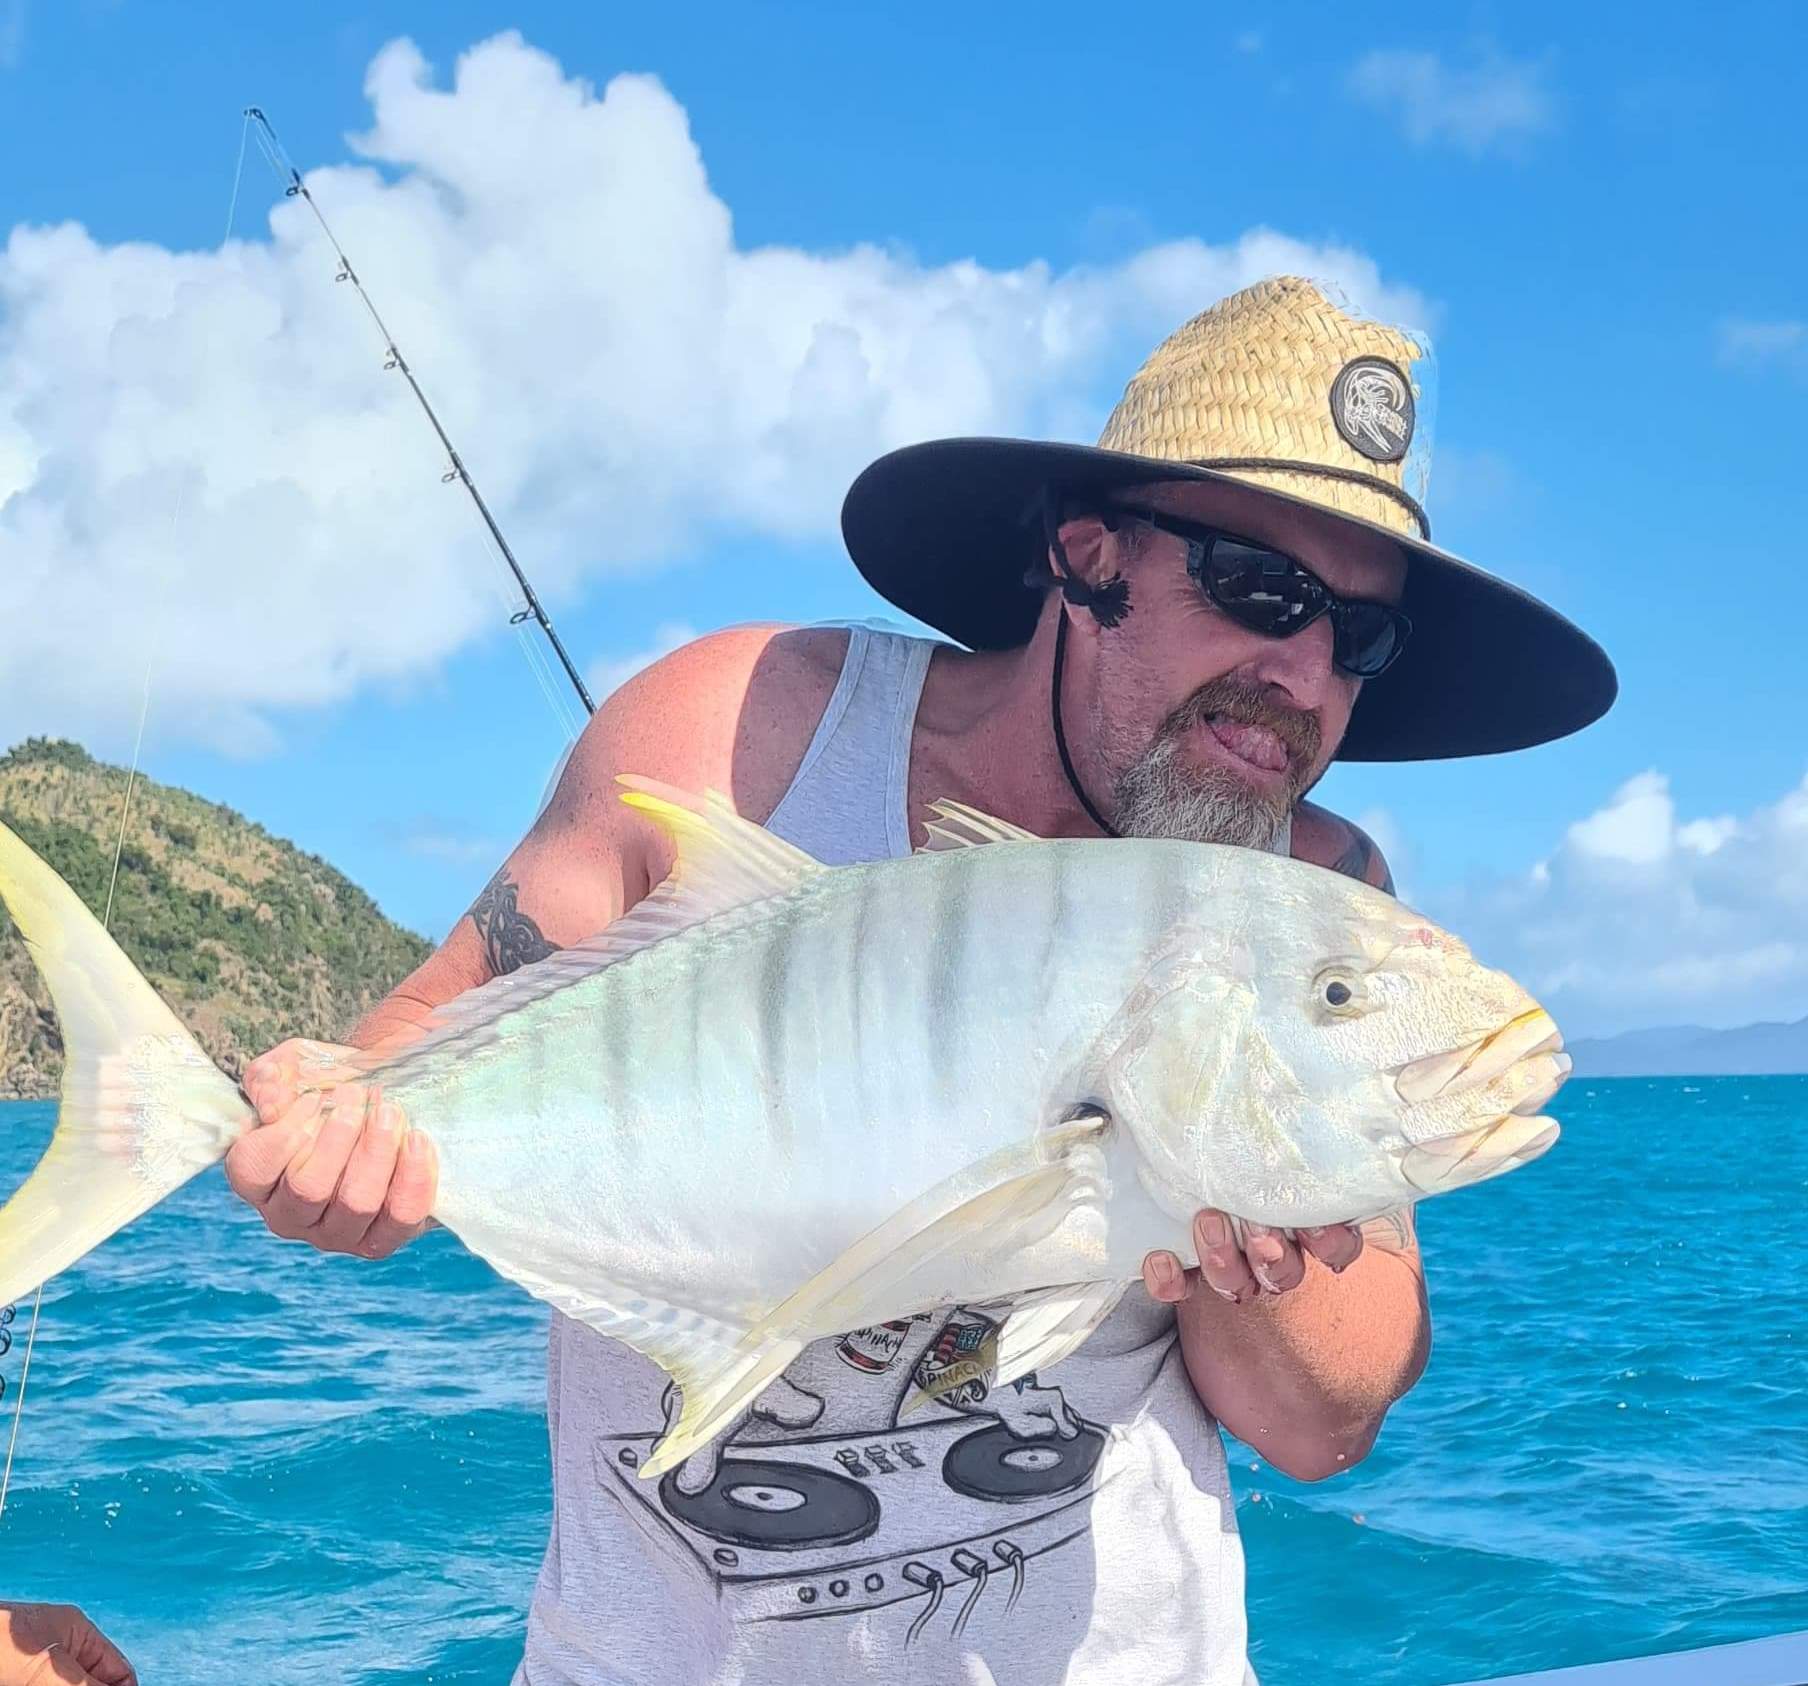 Afternoon Private Fishing Charter Airlie Beach Whitsundays Islands